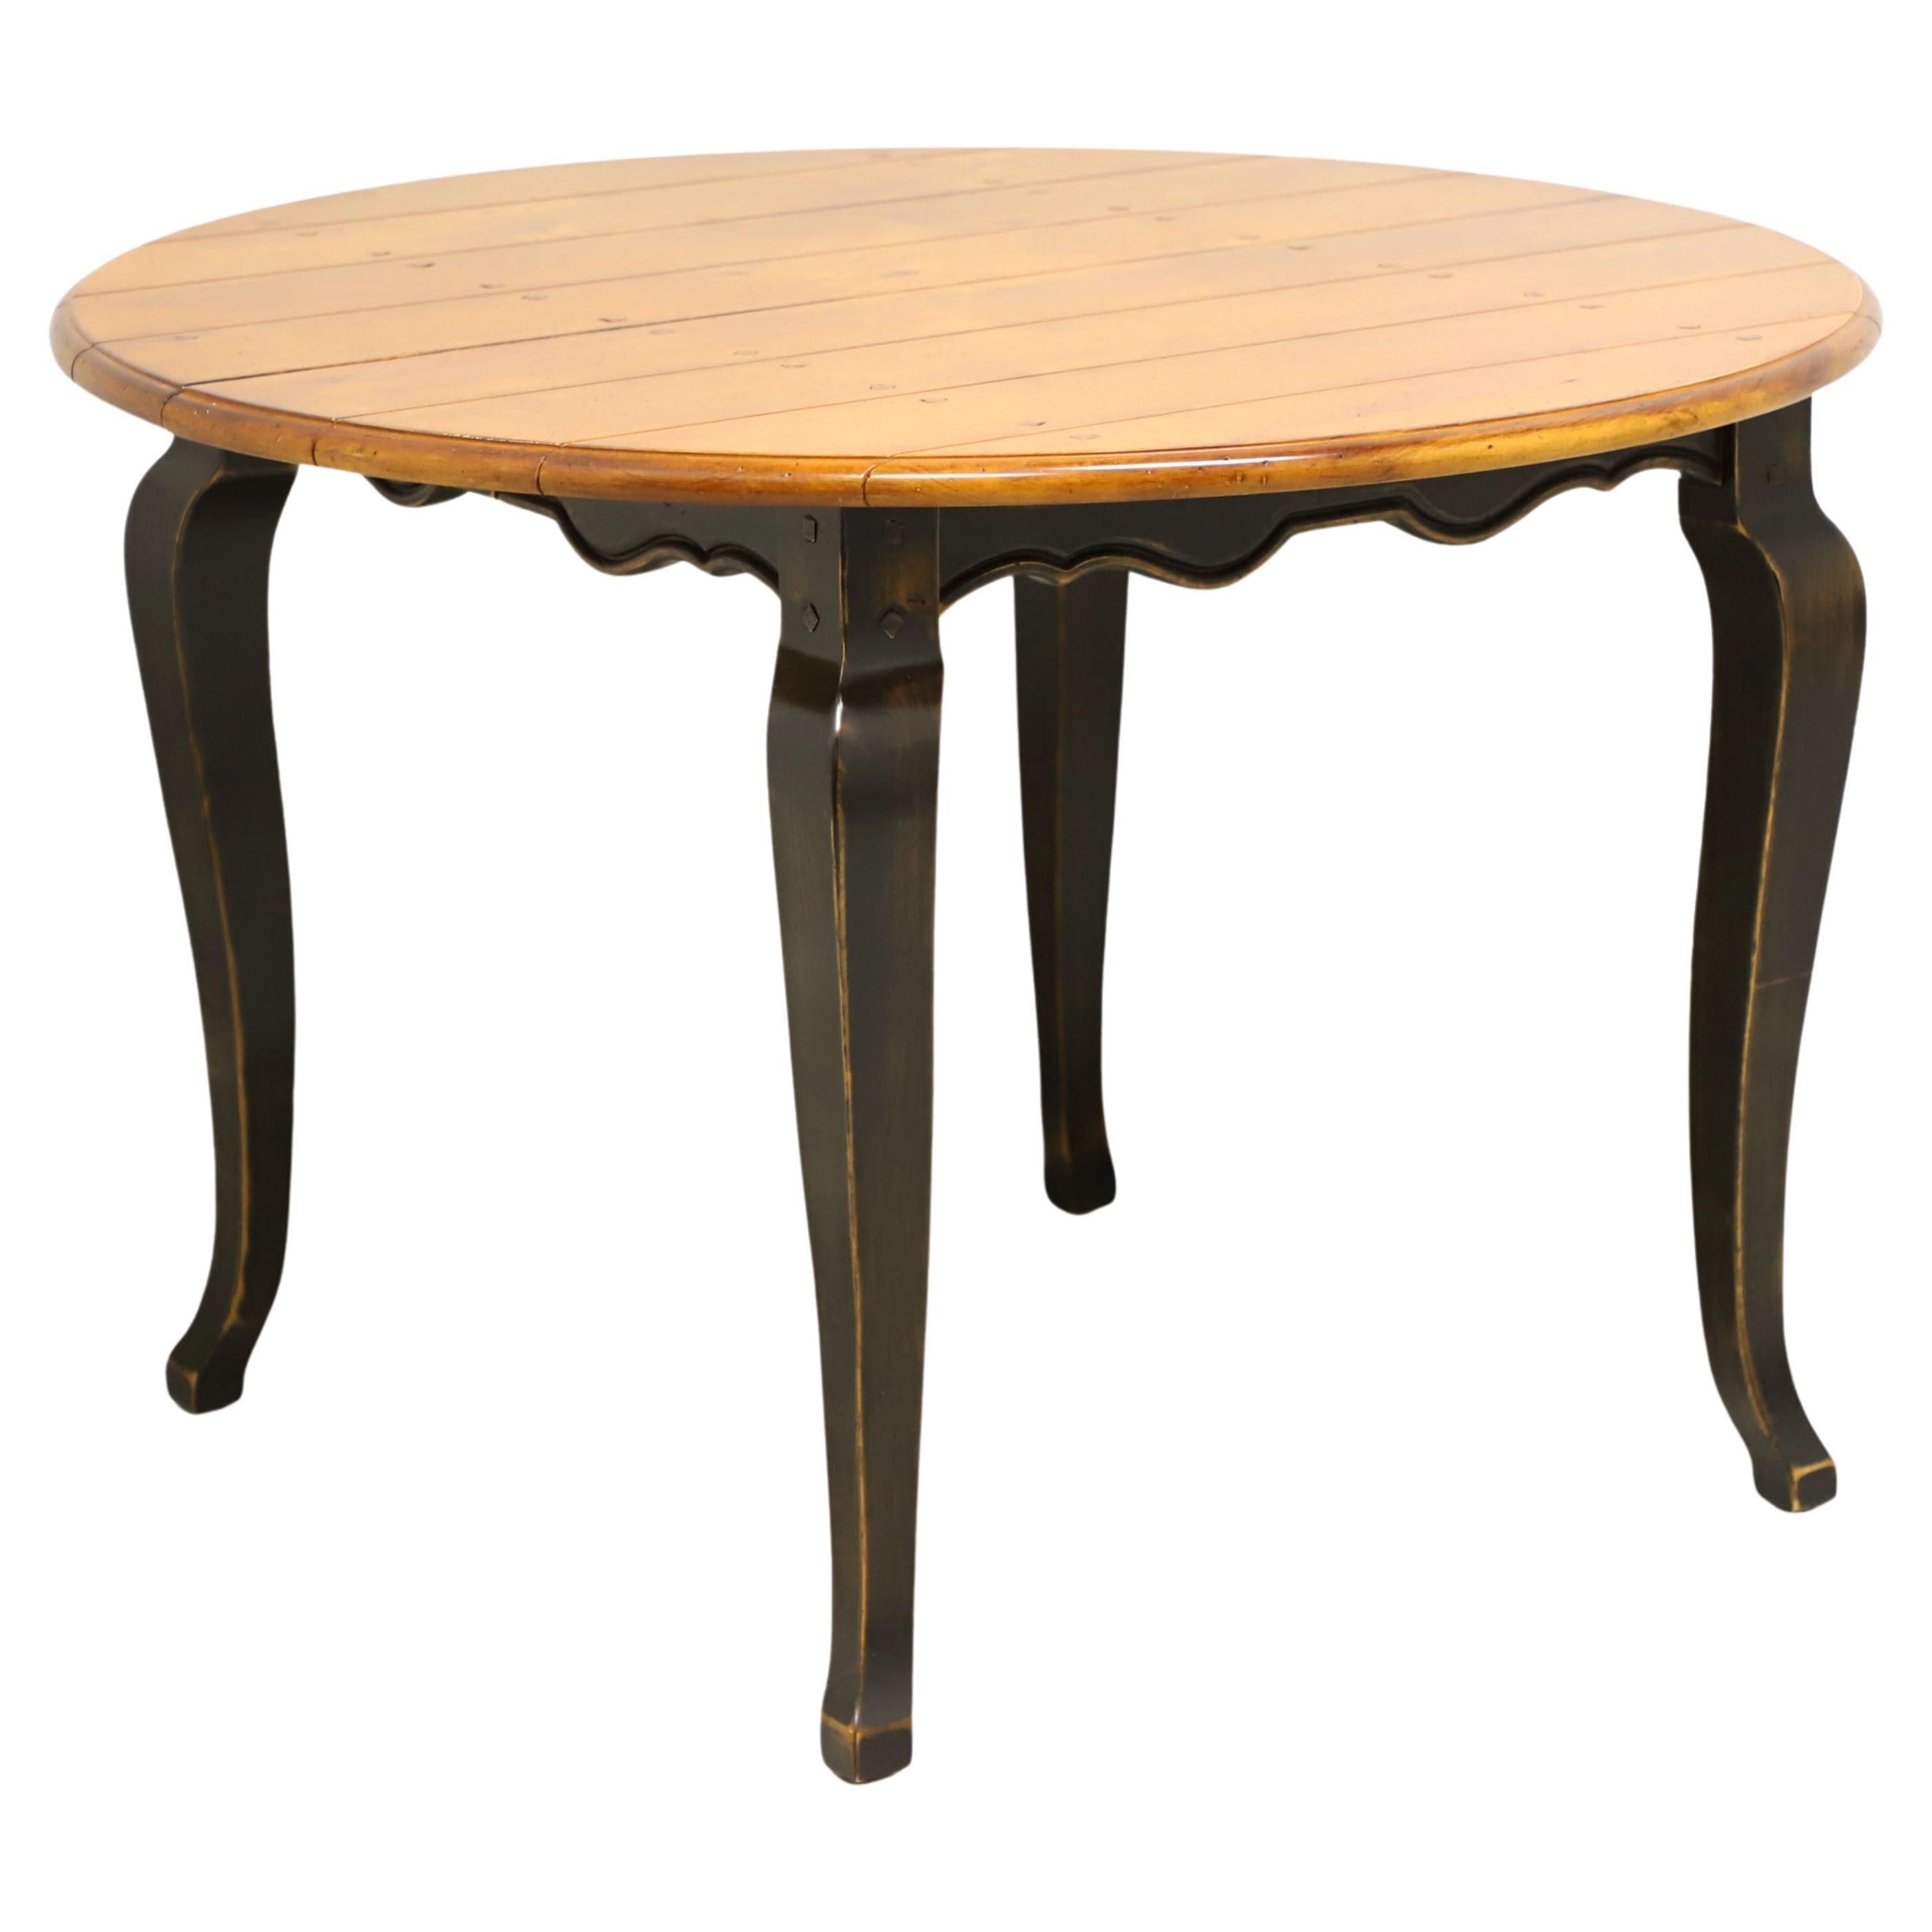 LORTS French Country Pine Farmhouse Dining Table